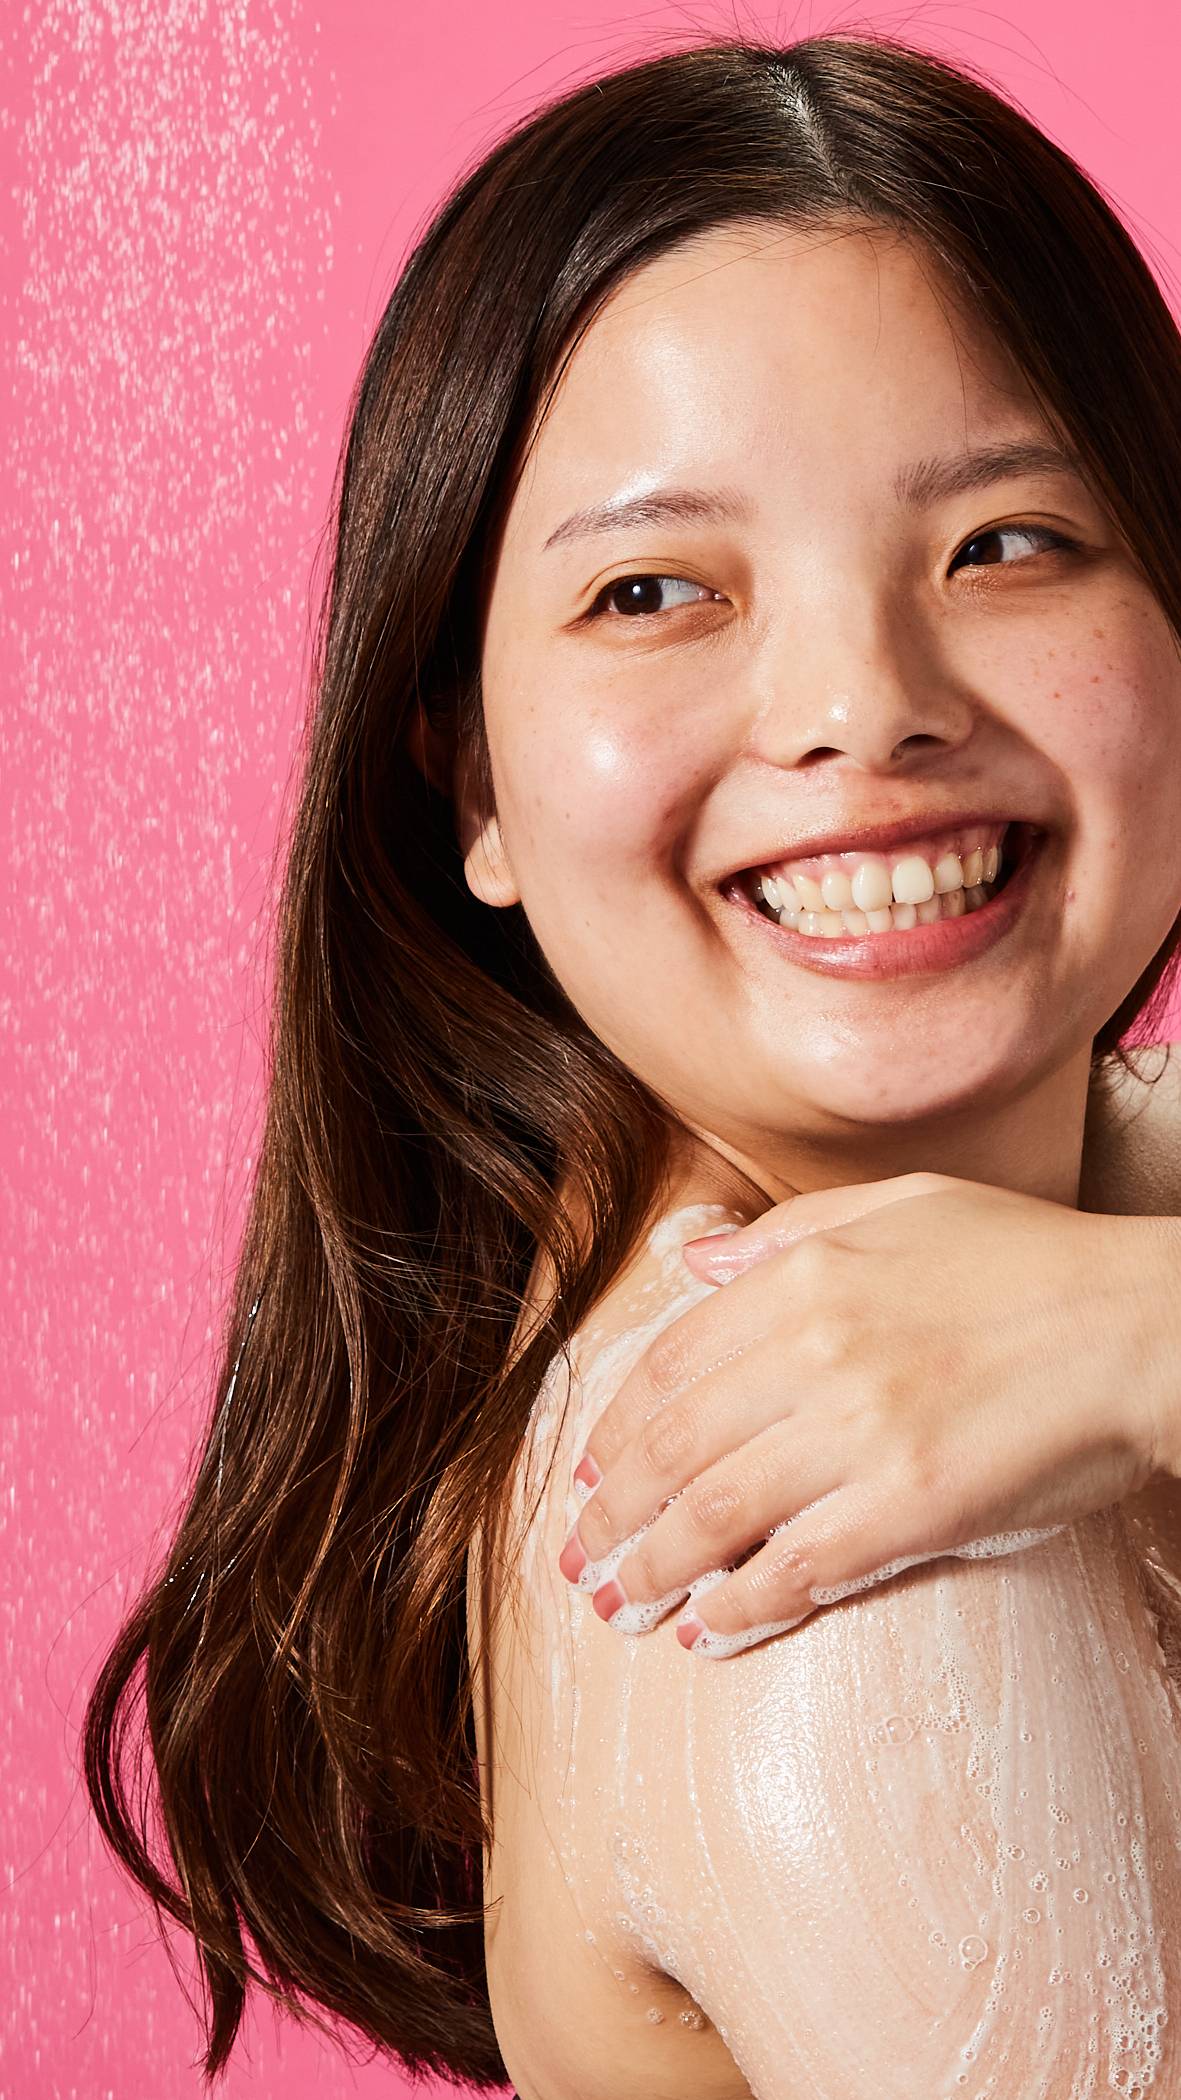 The model is smiling and looking over their shoulder as they stand under the shower and lather up their upper arm with Sakura shower gel on a pink background. 